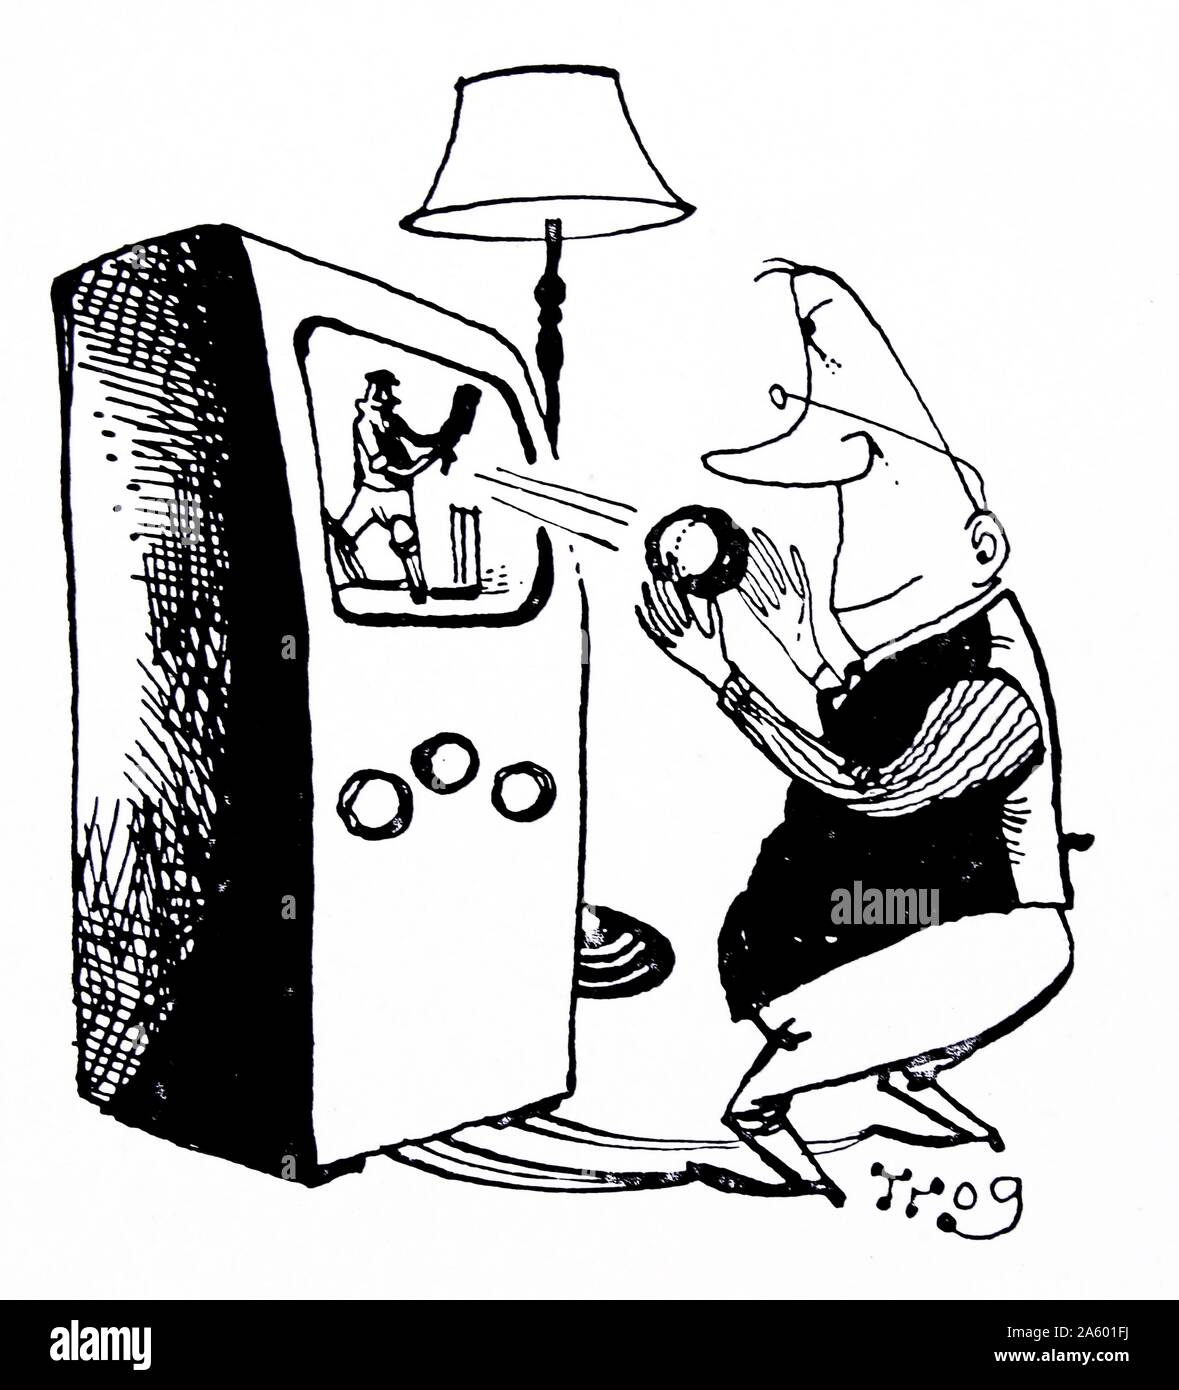 cartoon of a man catching a cricket ball which is batted out of a television as he watches cricket with great intensity. By Walter Ernest 'Wally' Fawkes (born 1924). British-Canadian jazz clarinettist and a satirical cartoonist. As a cartoonist, he generally worked under the name of 'Trog' . Stock Photo